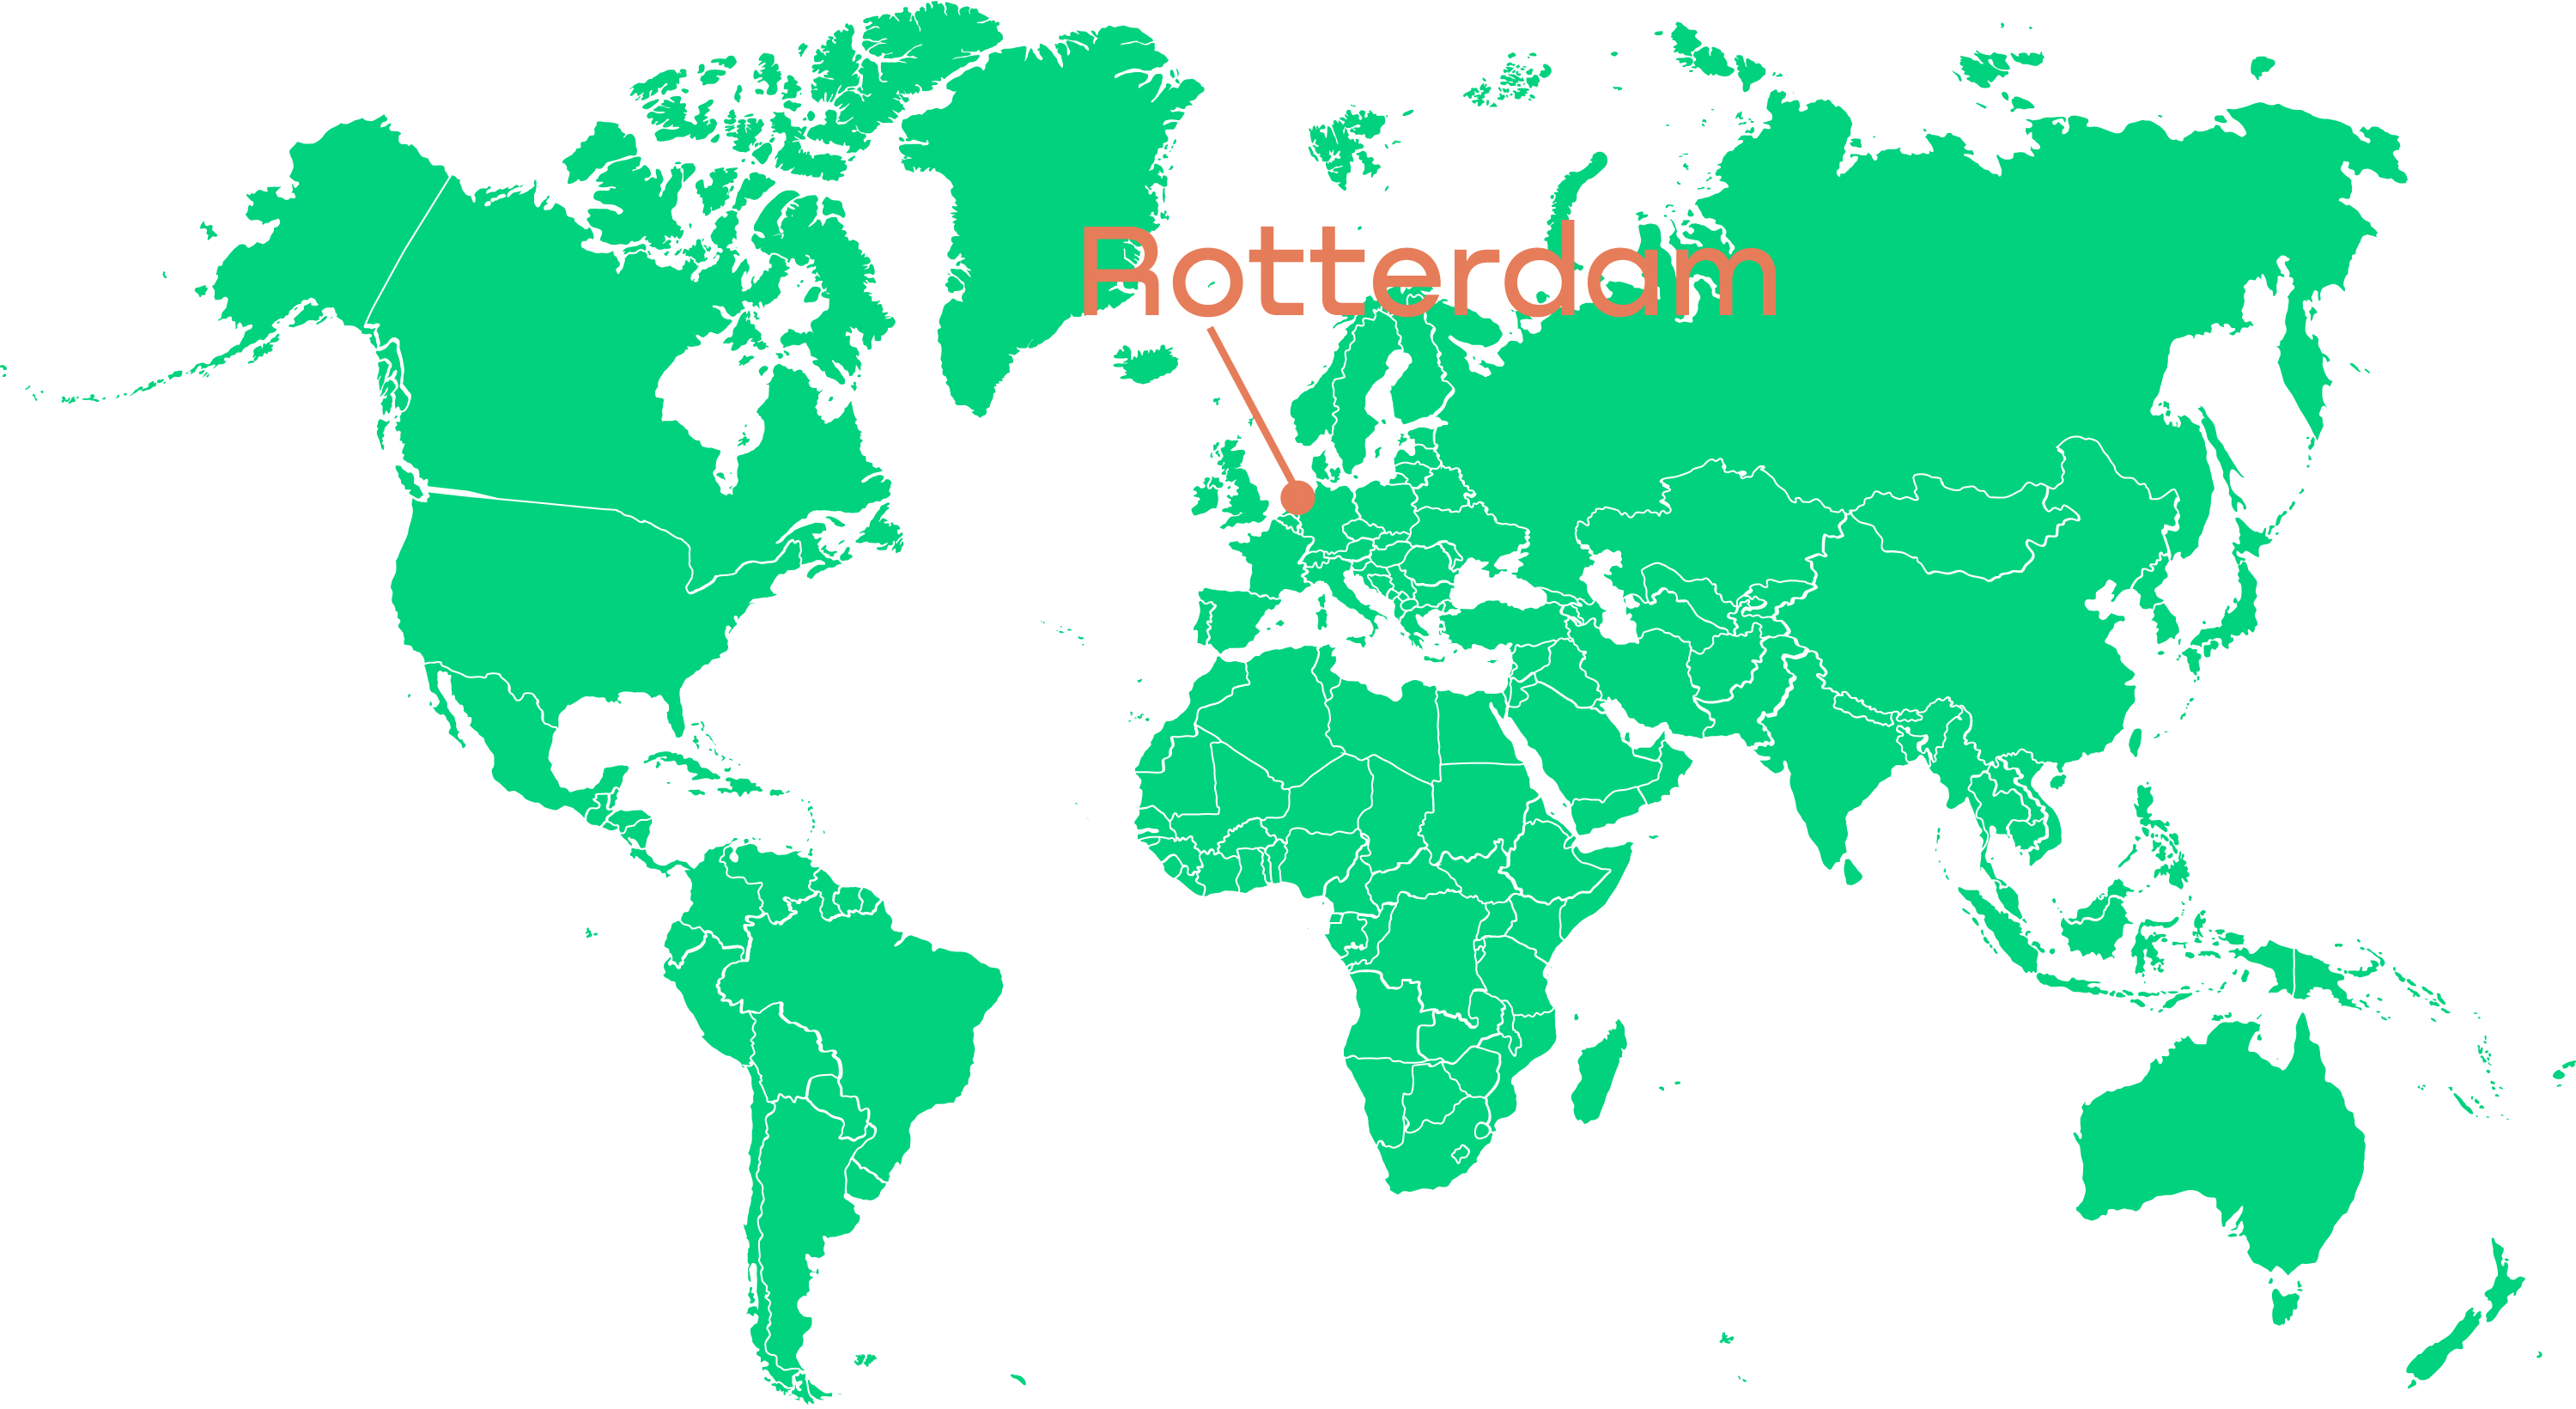 This image shows a green world map with marker on Rotterdam